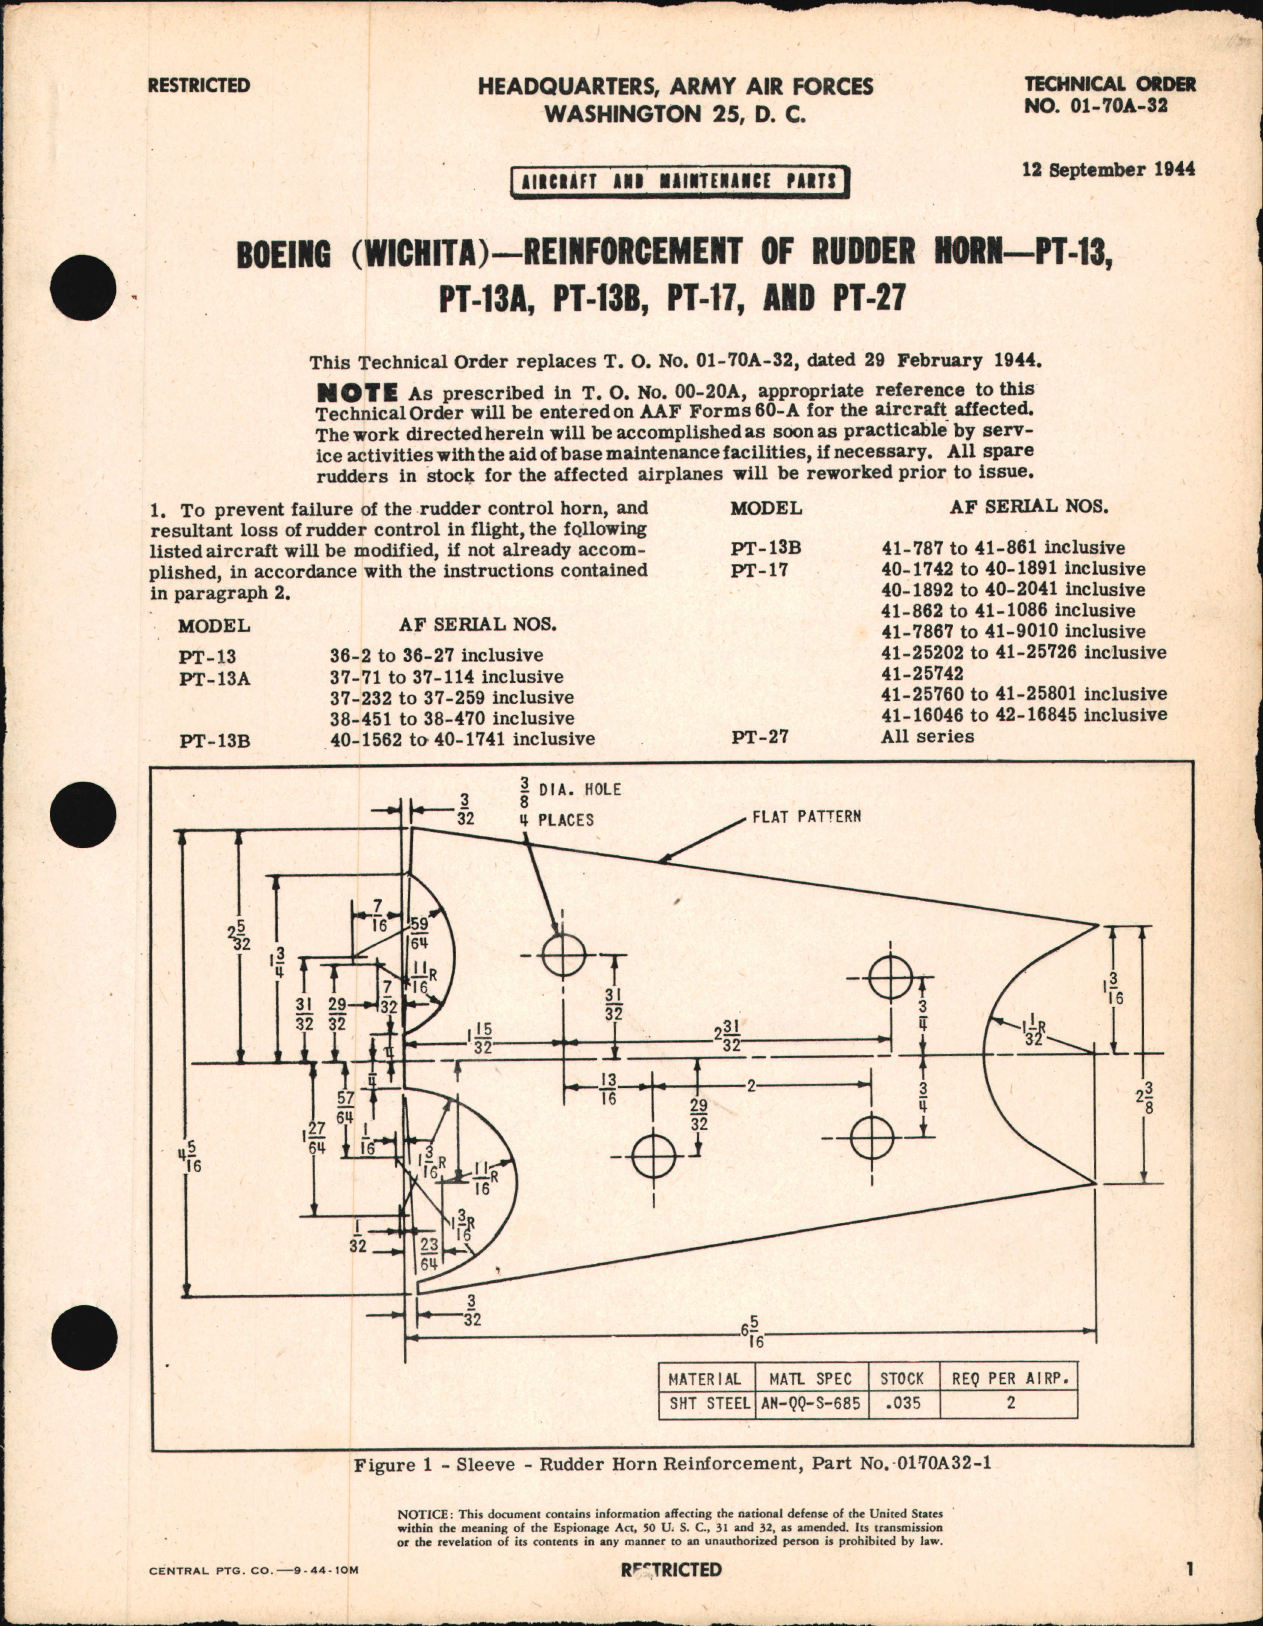 Sample page 1 from AirCorps Library document: Reinforcement of Rudder Horn for PT-13, -13A, -13B, -17, & -27